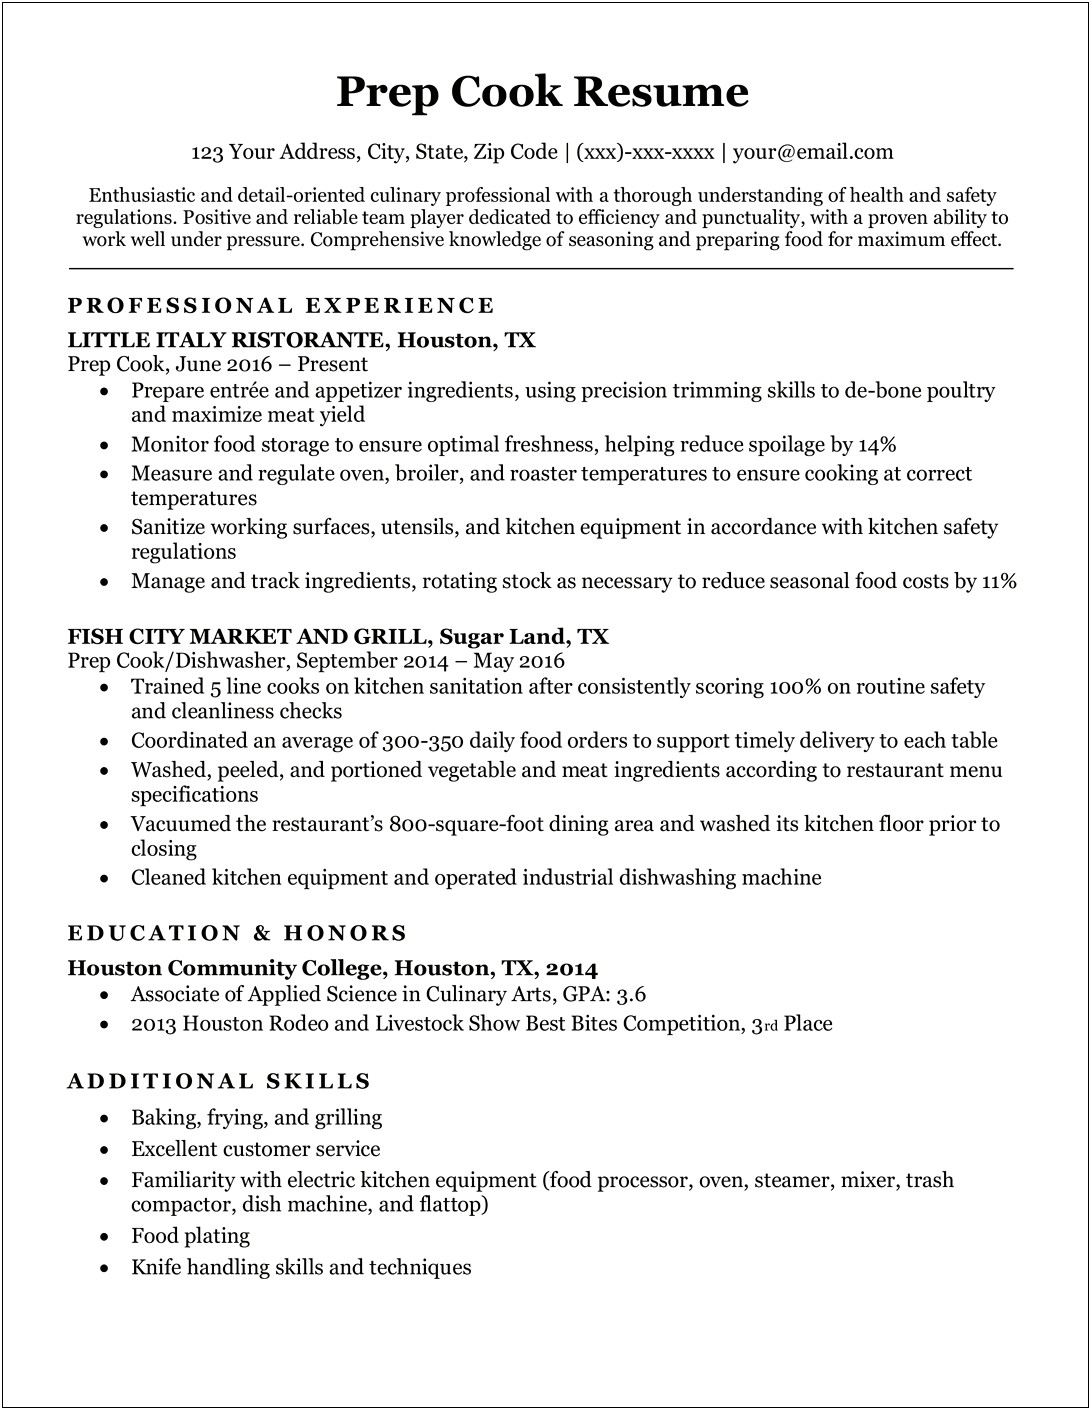 Examples Of Professional Chef Resumes